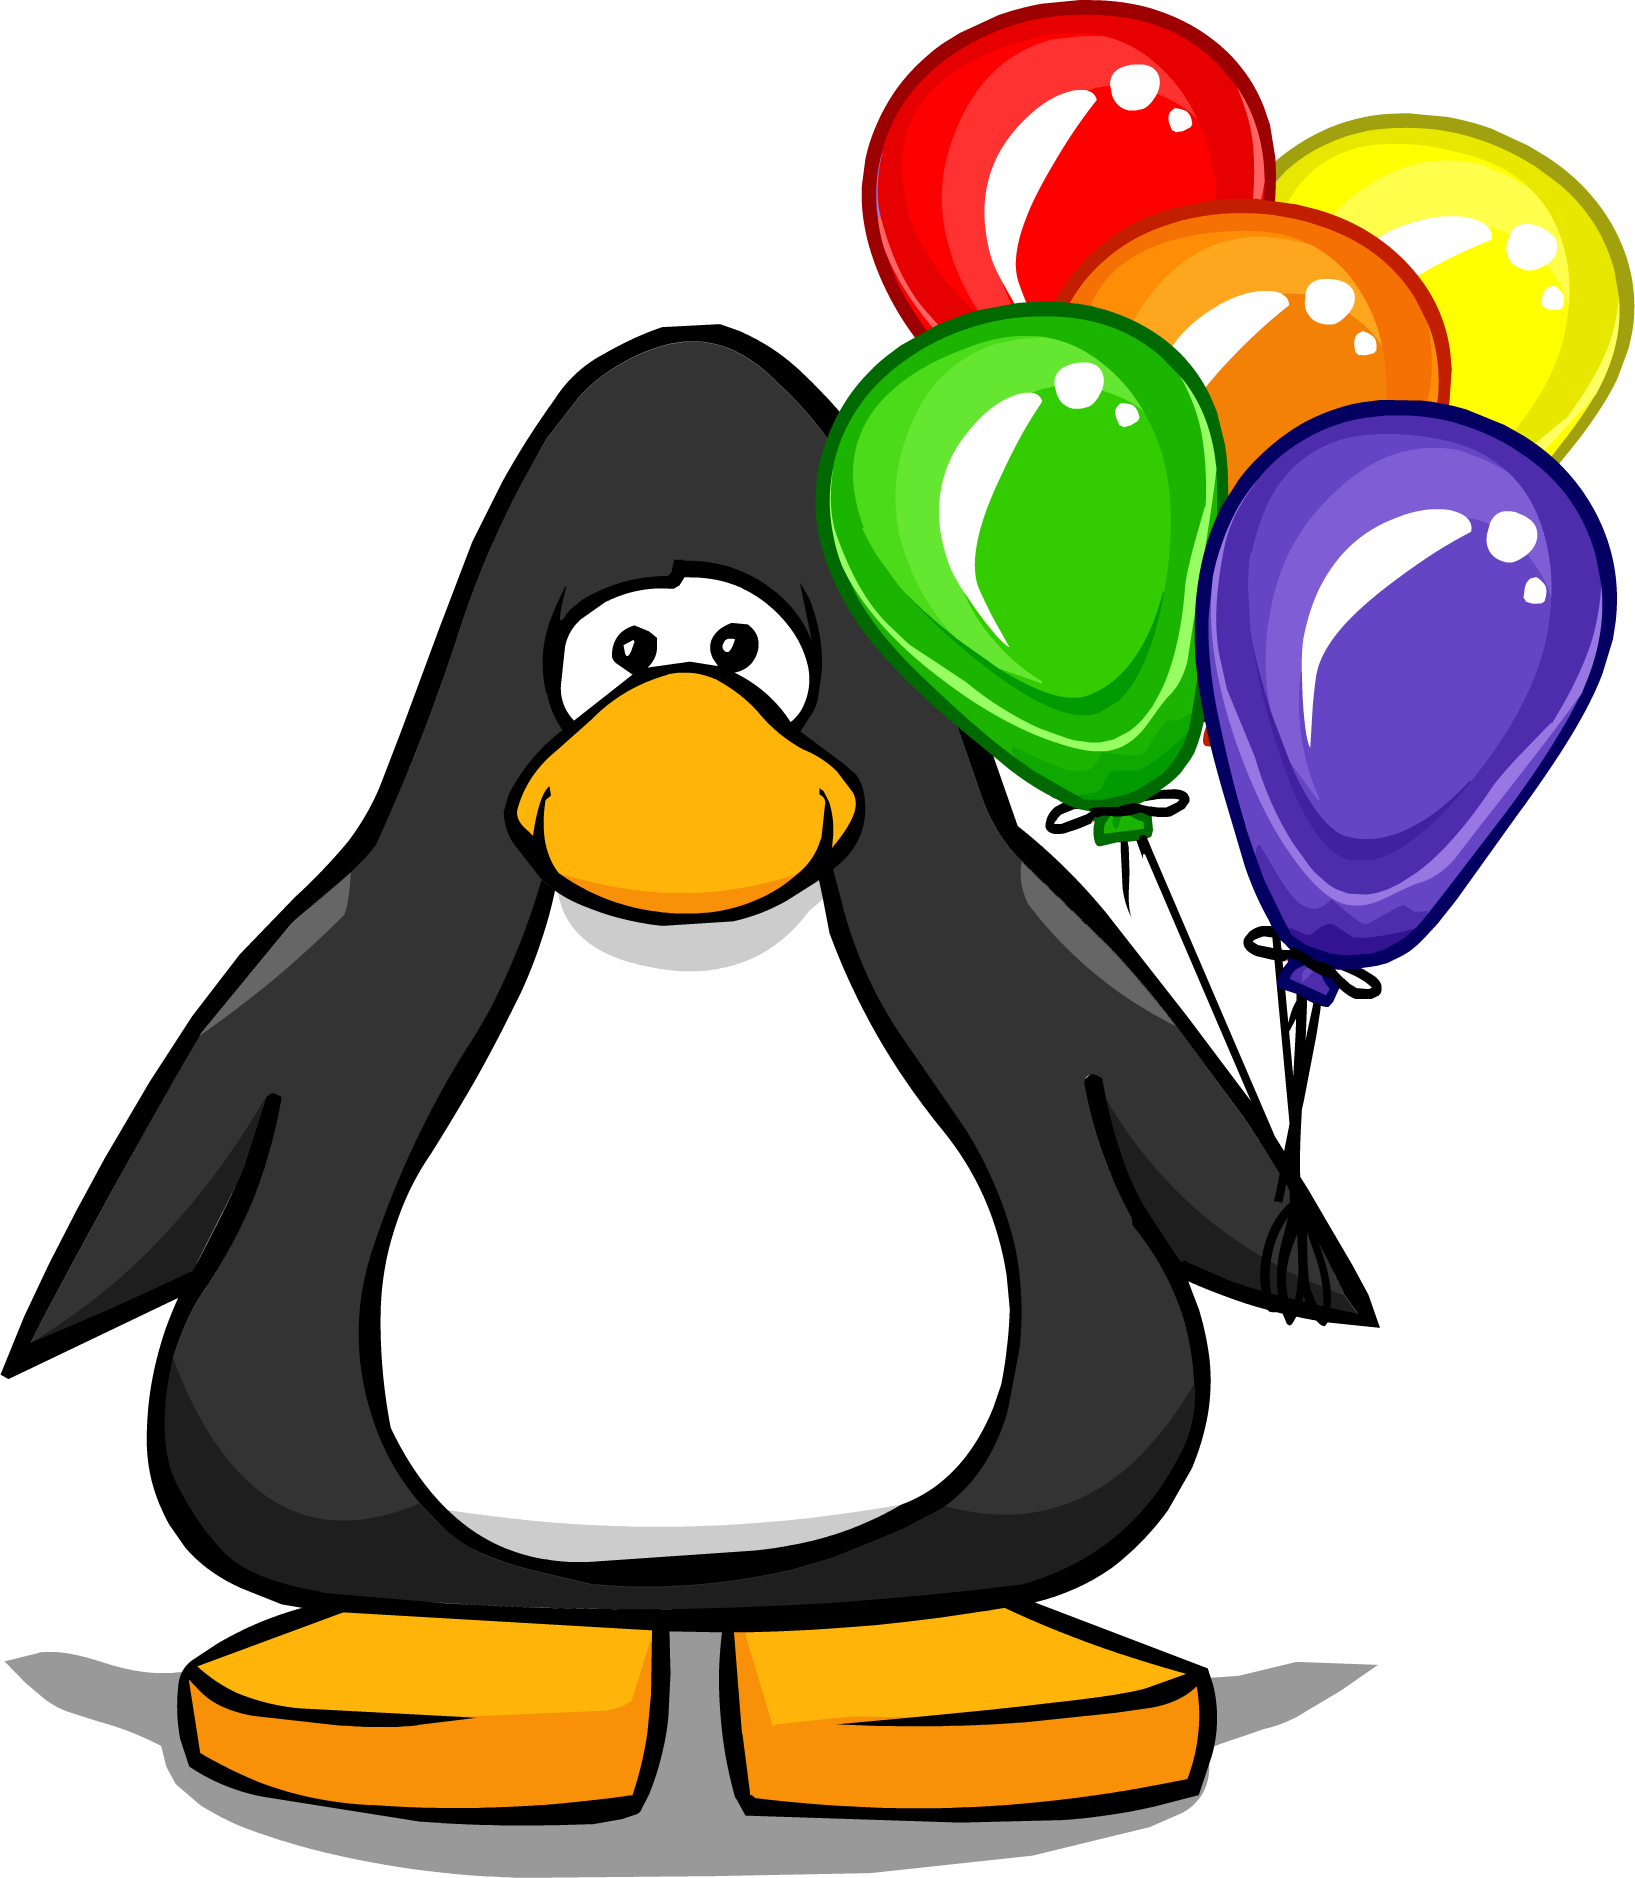 Image of balloons from. Diamond clipart bunch